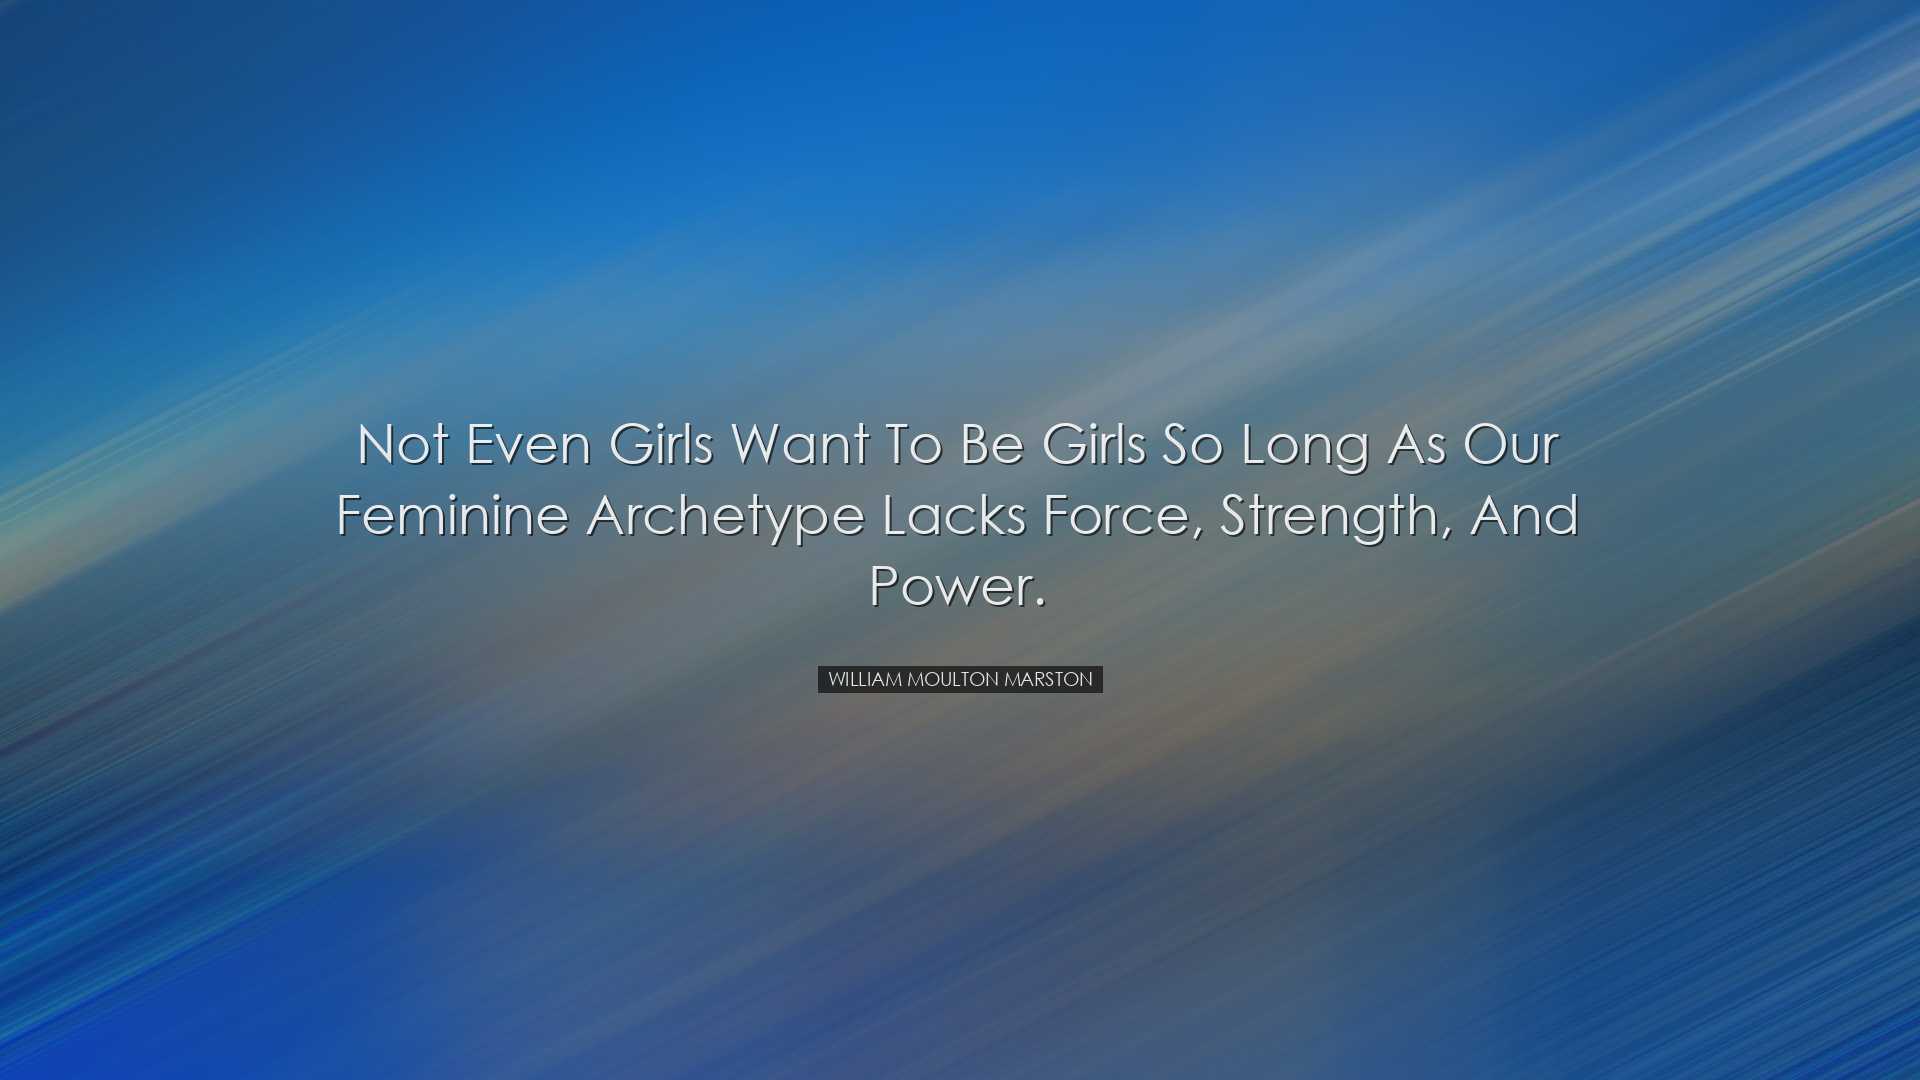 Not even girls want to be girls so long as our feminine archetype